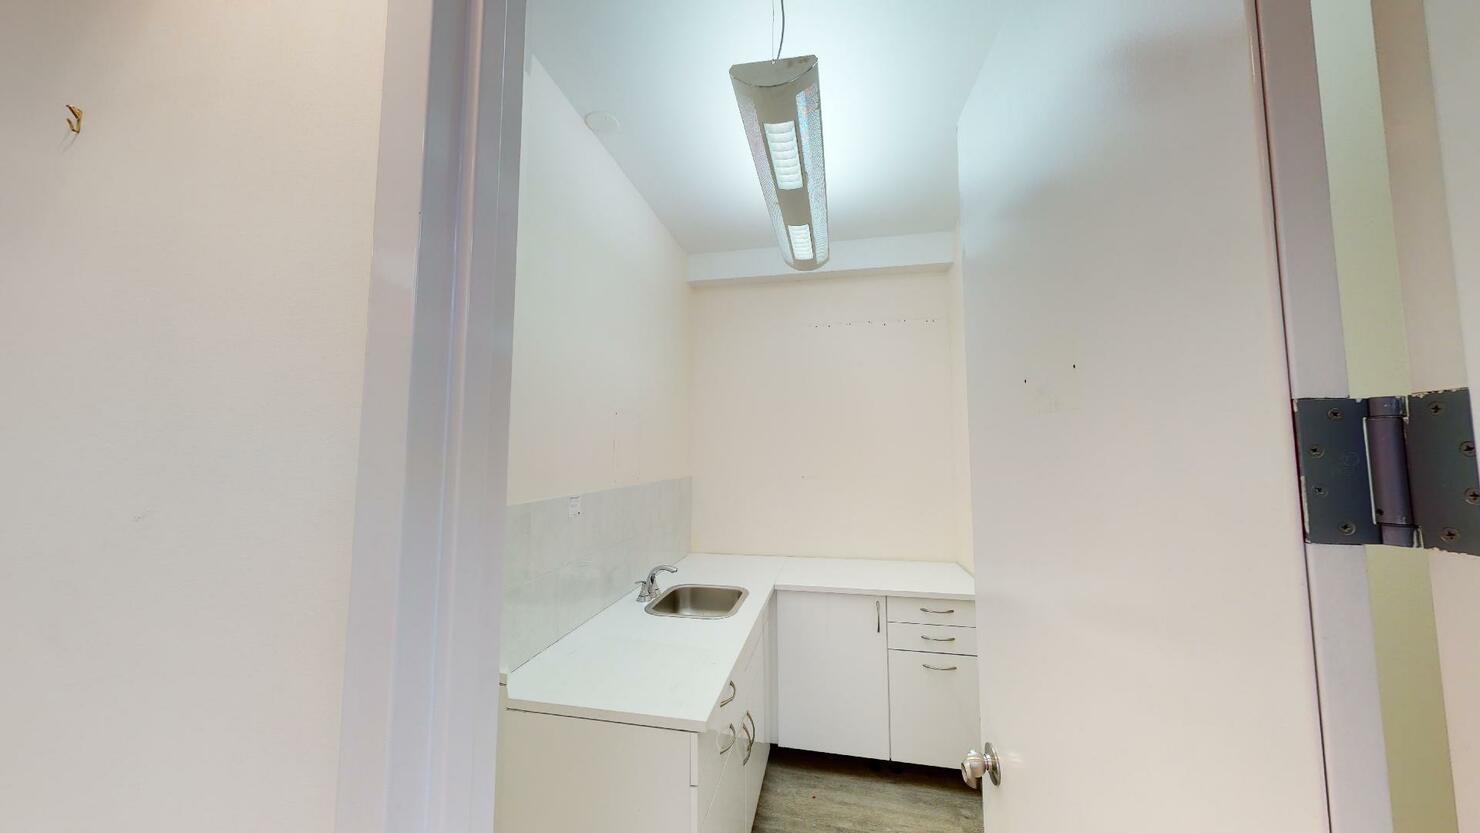 369 Lexington Avenue Office Space, #8A - Room with Sink